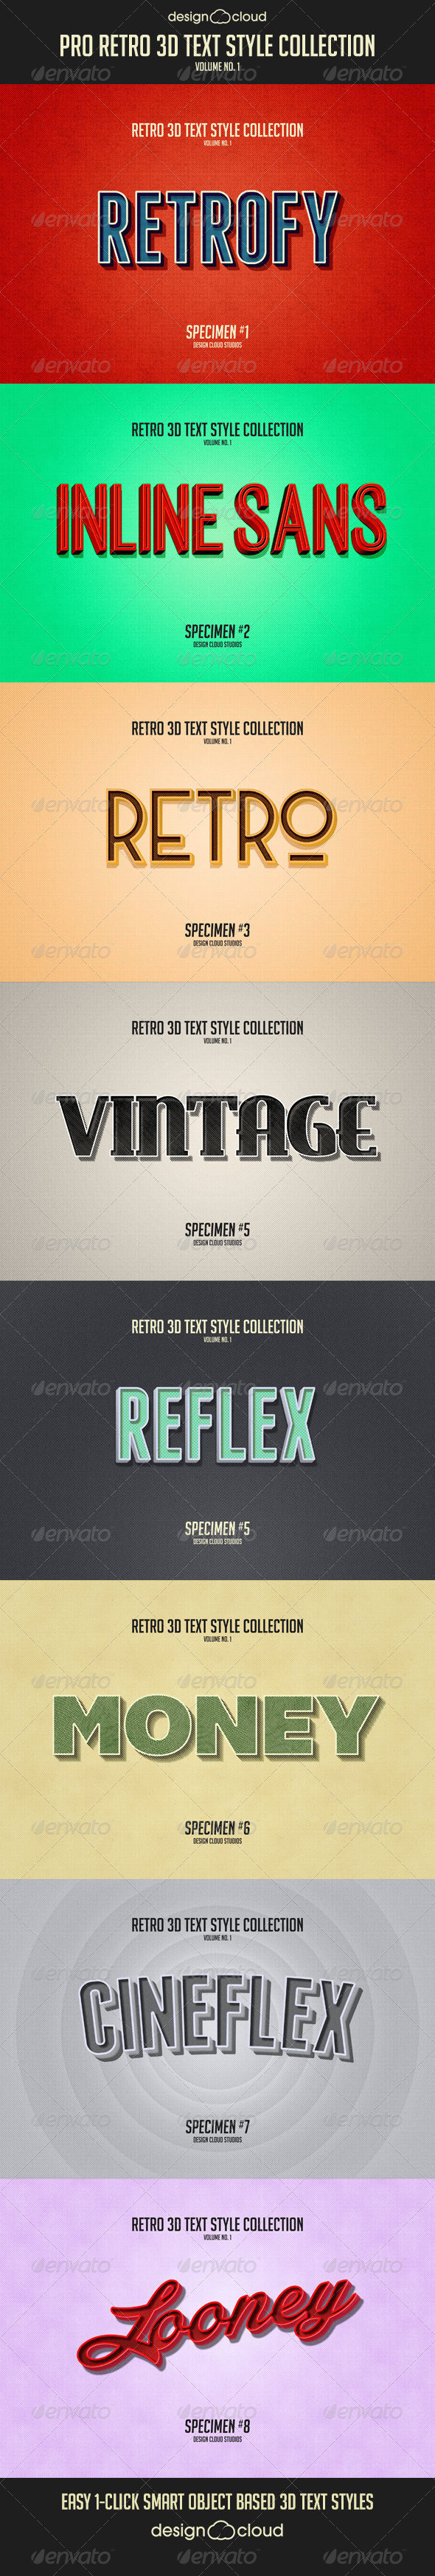 Preview pro retro 3d text style collection vol 1